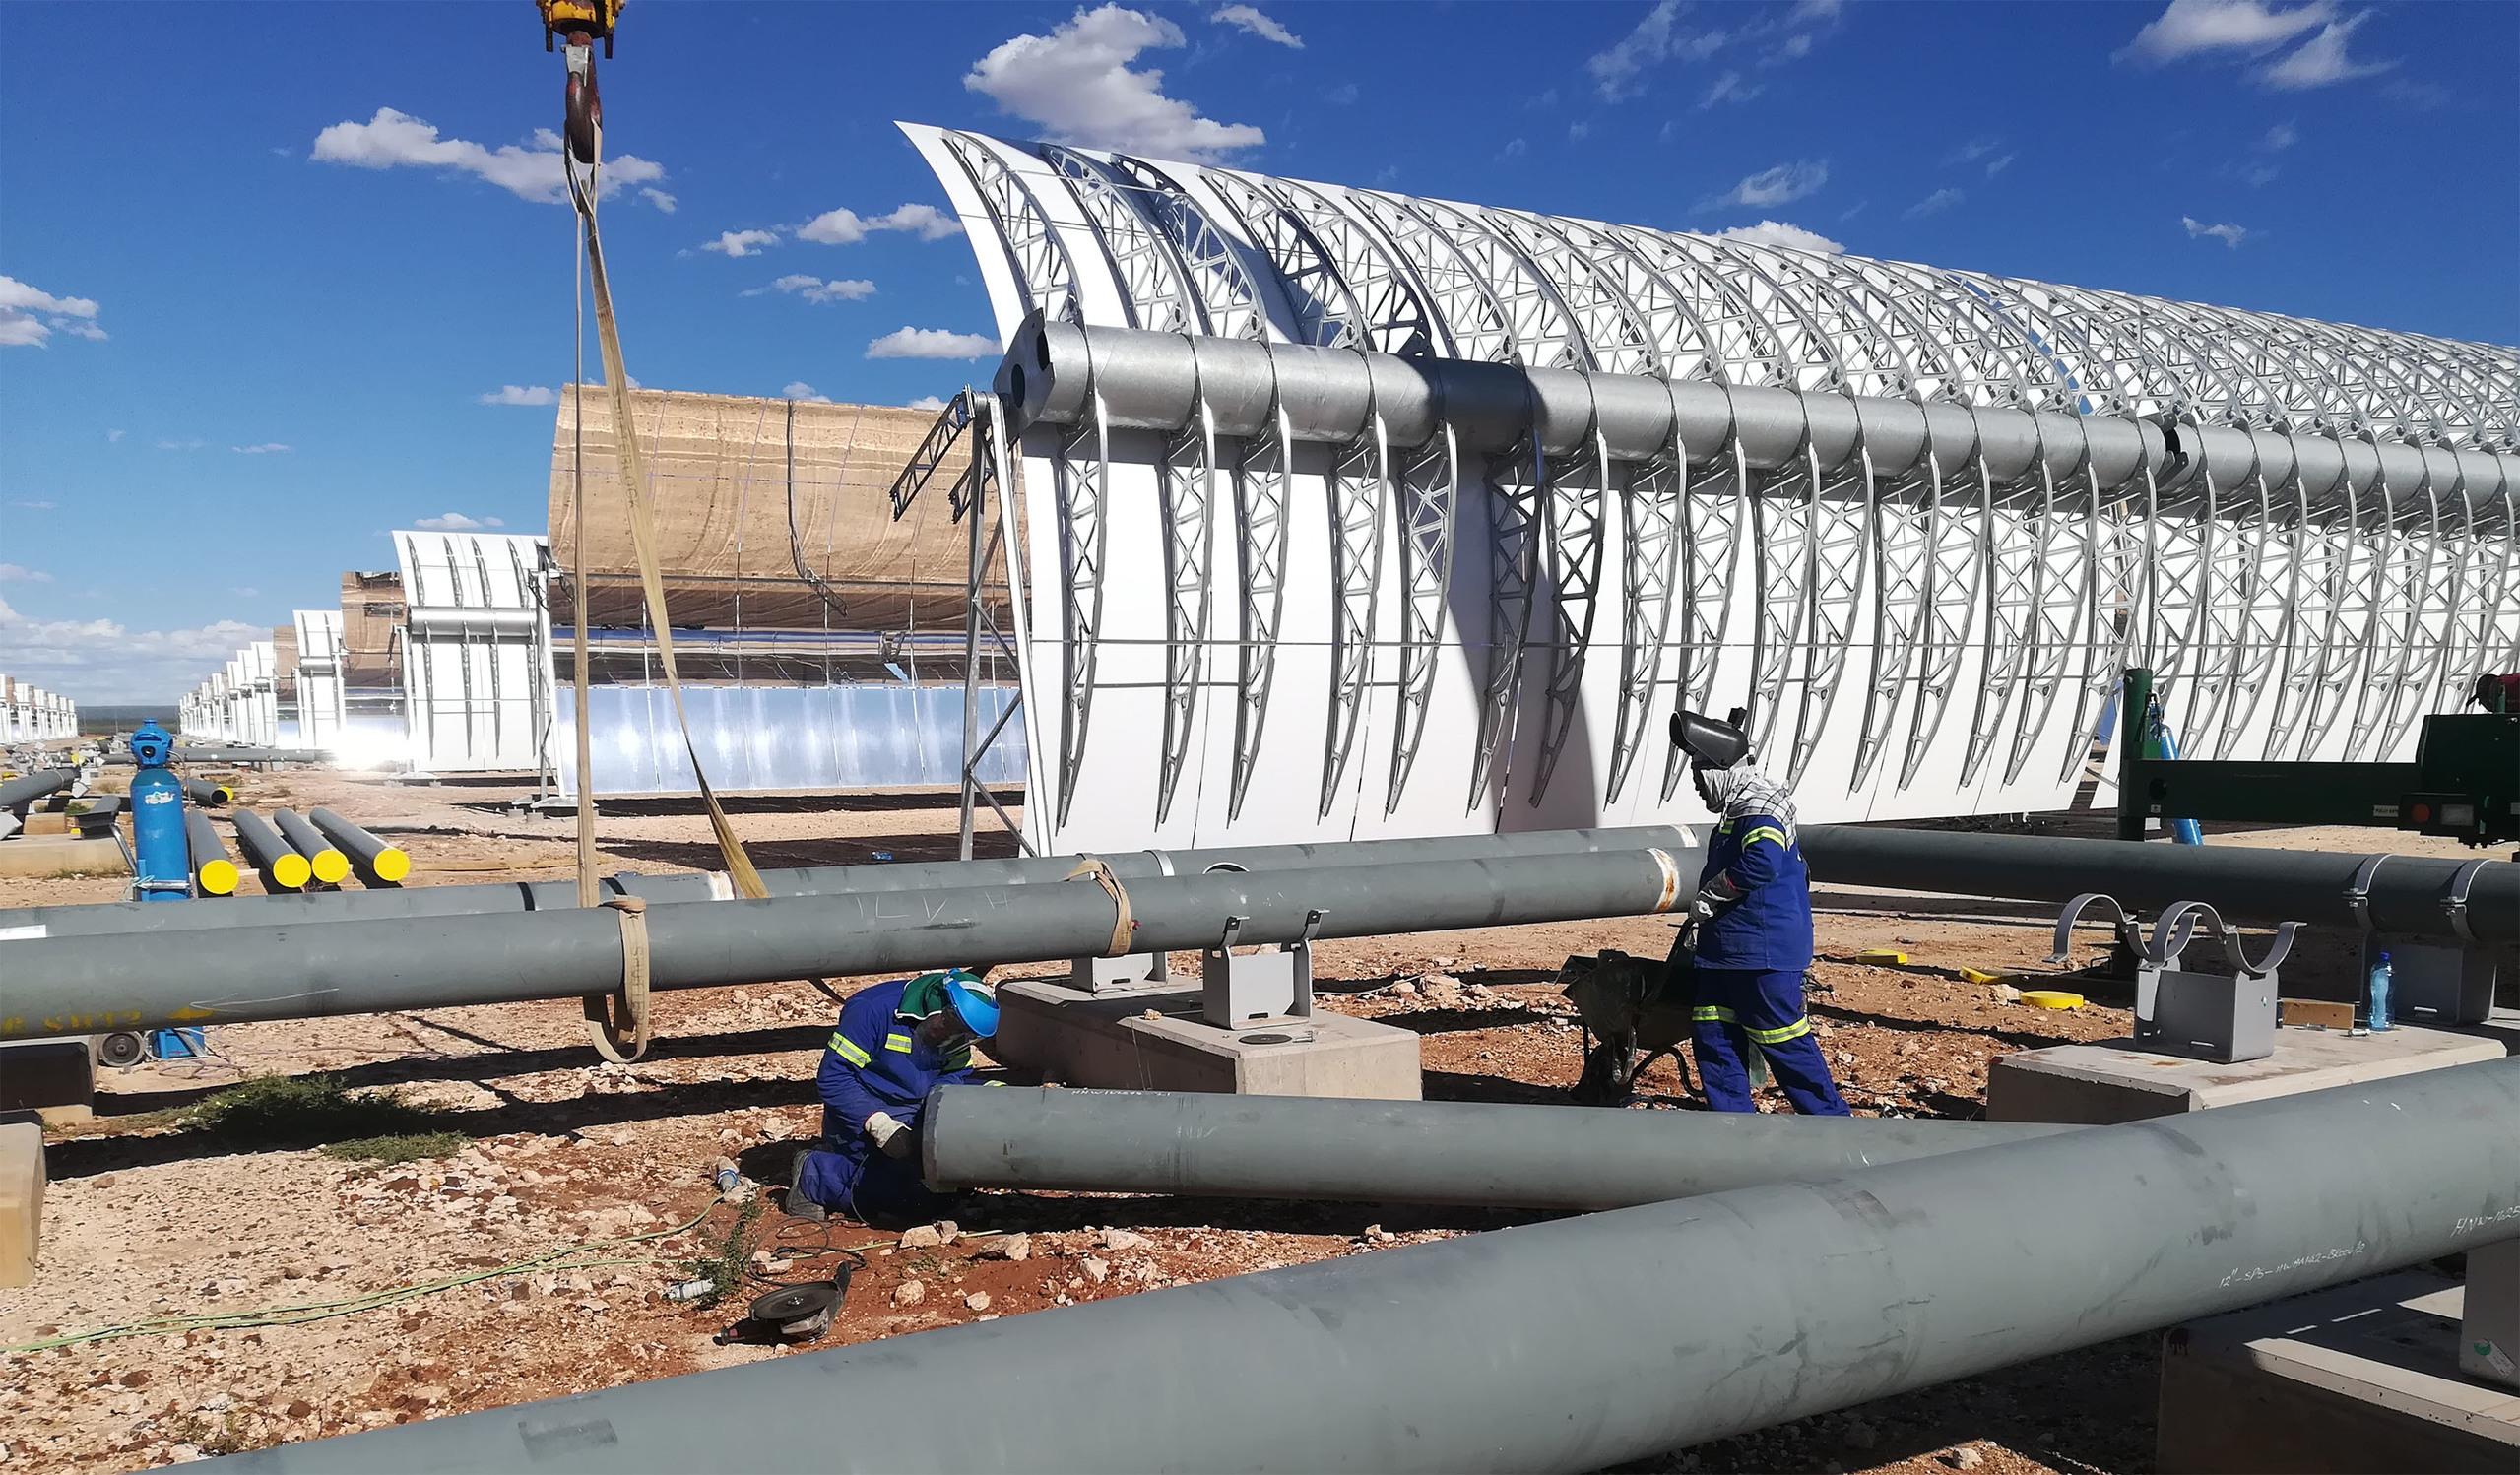 Workman constructing part of the solar power system at Kathu solar park